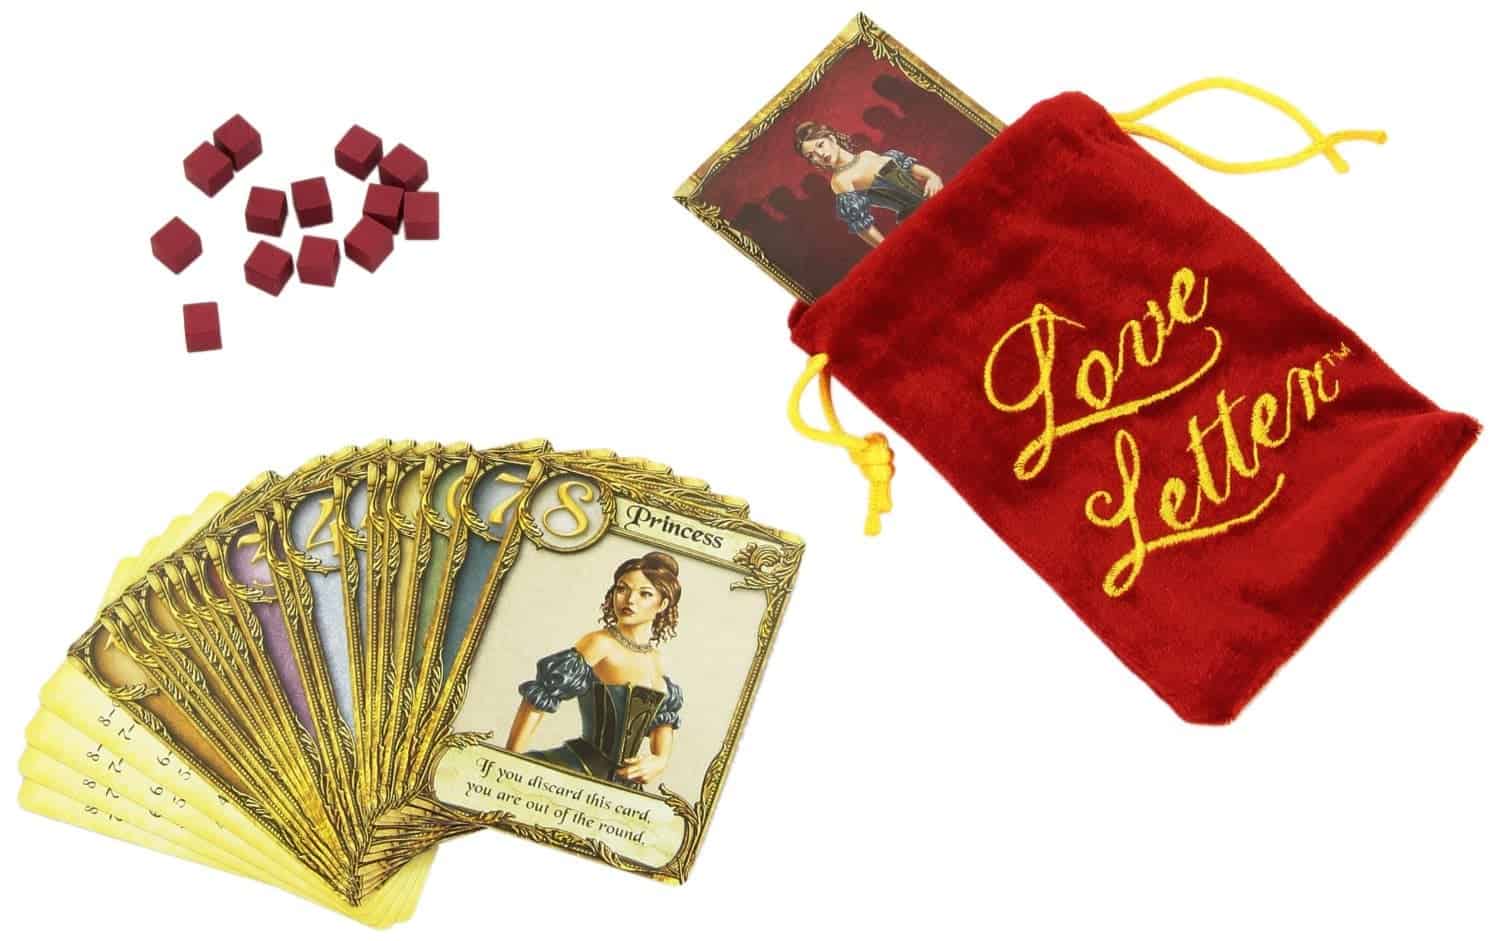 10+ Amazing Card Games for your Family: Love Letter | www.thepinningmama.com